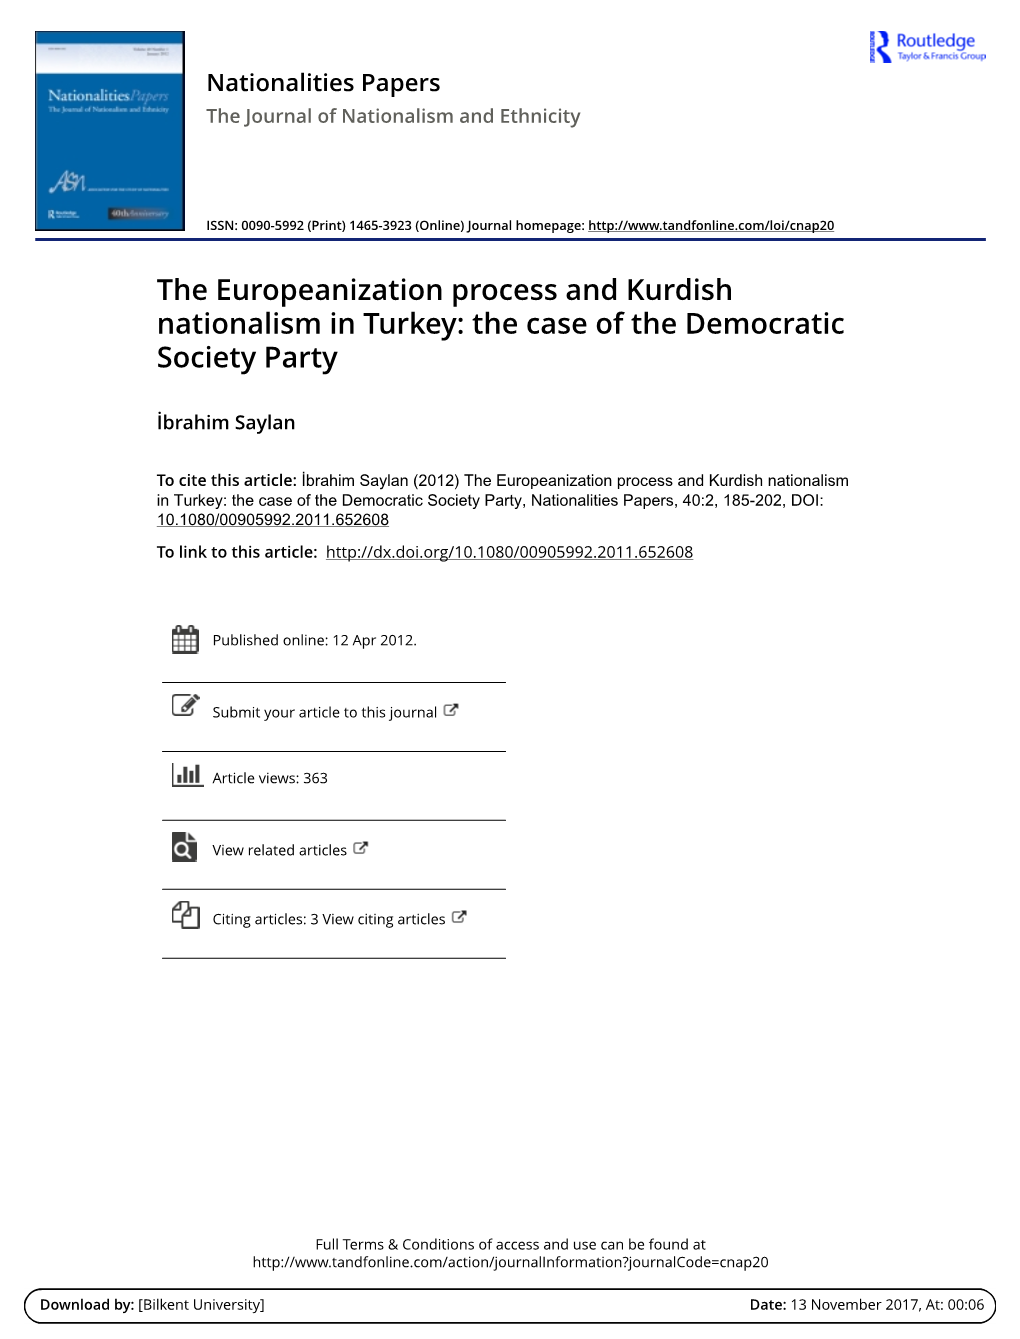 The Europeanization Process and Kurdish Nationalism in Turkey: the Case of the Democratic Society Party